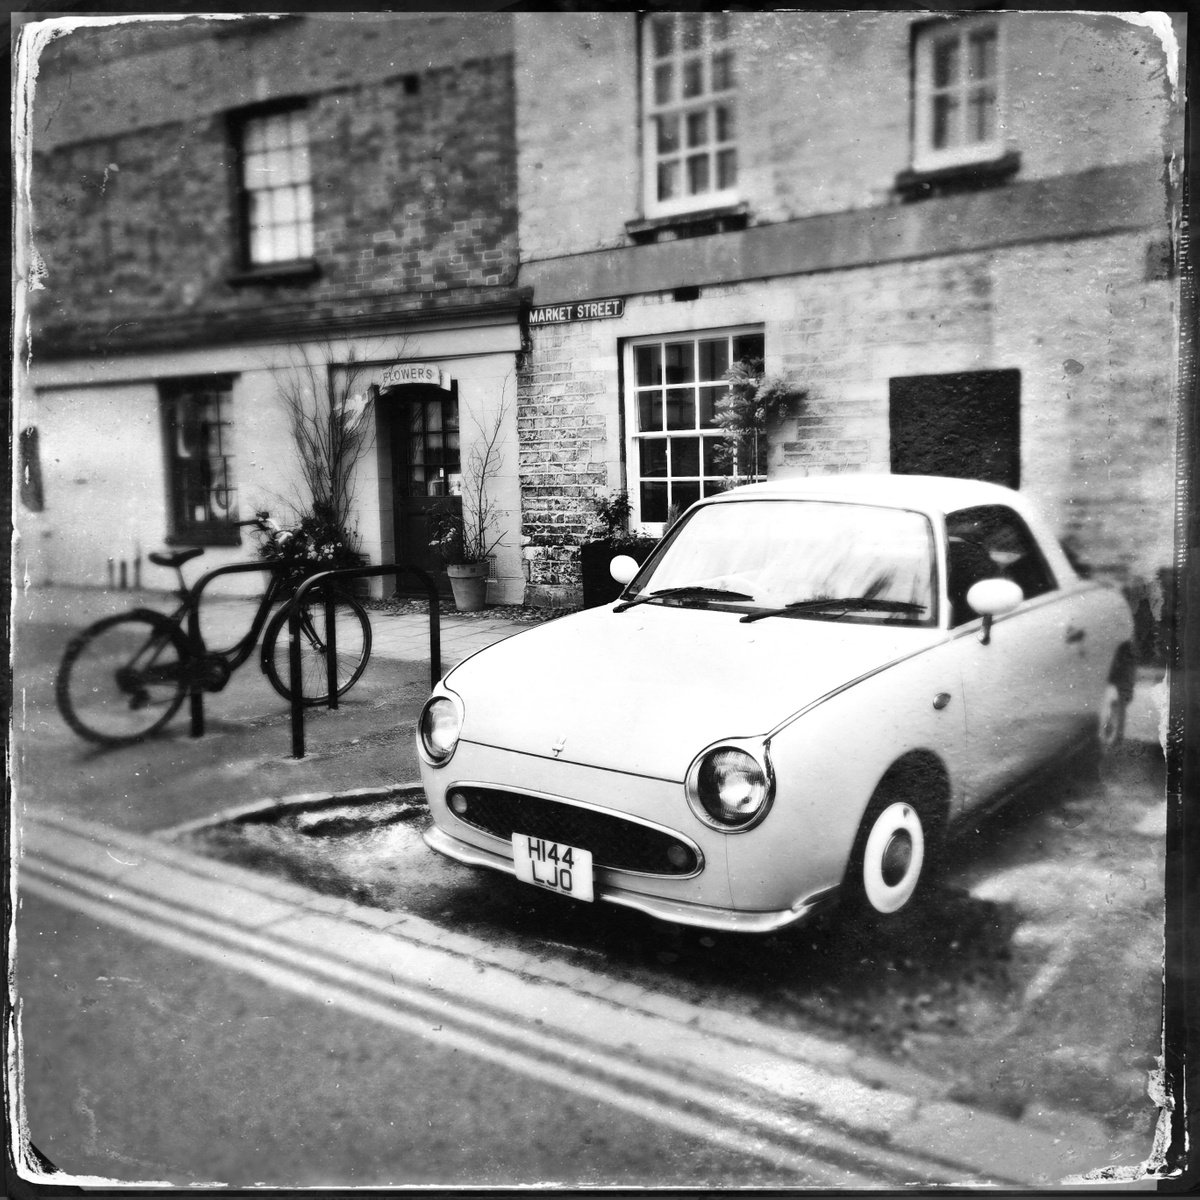 Figaro, Woodstock, Oxfordshire 27th May 2019 (Limited Edition) by Anna Bush